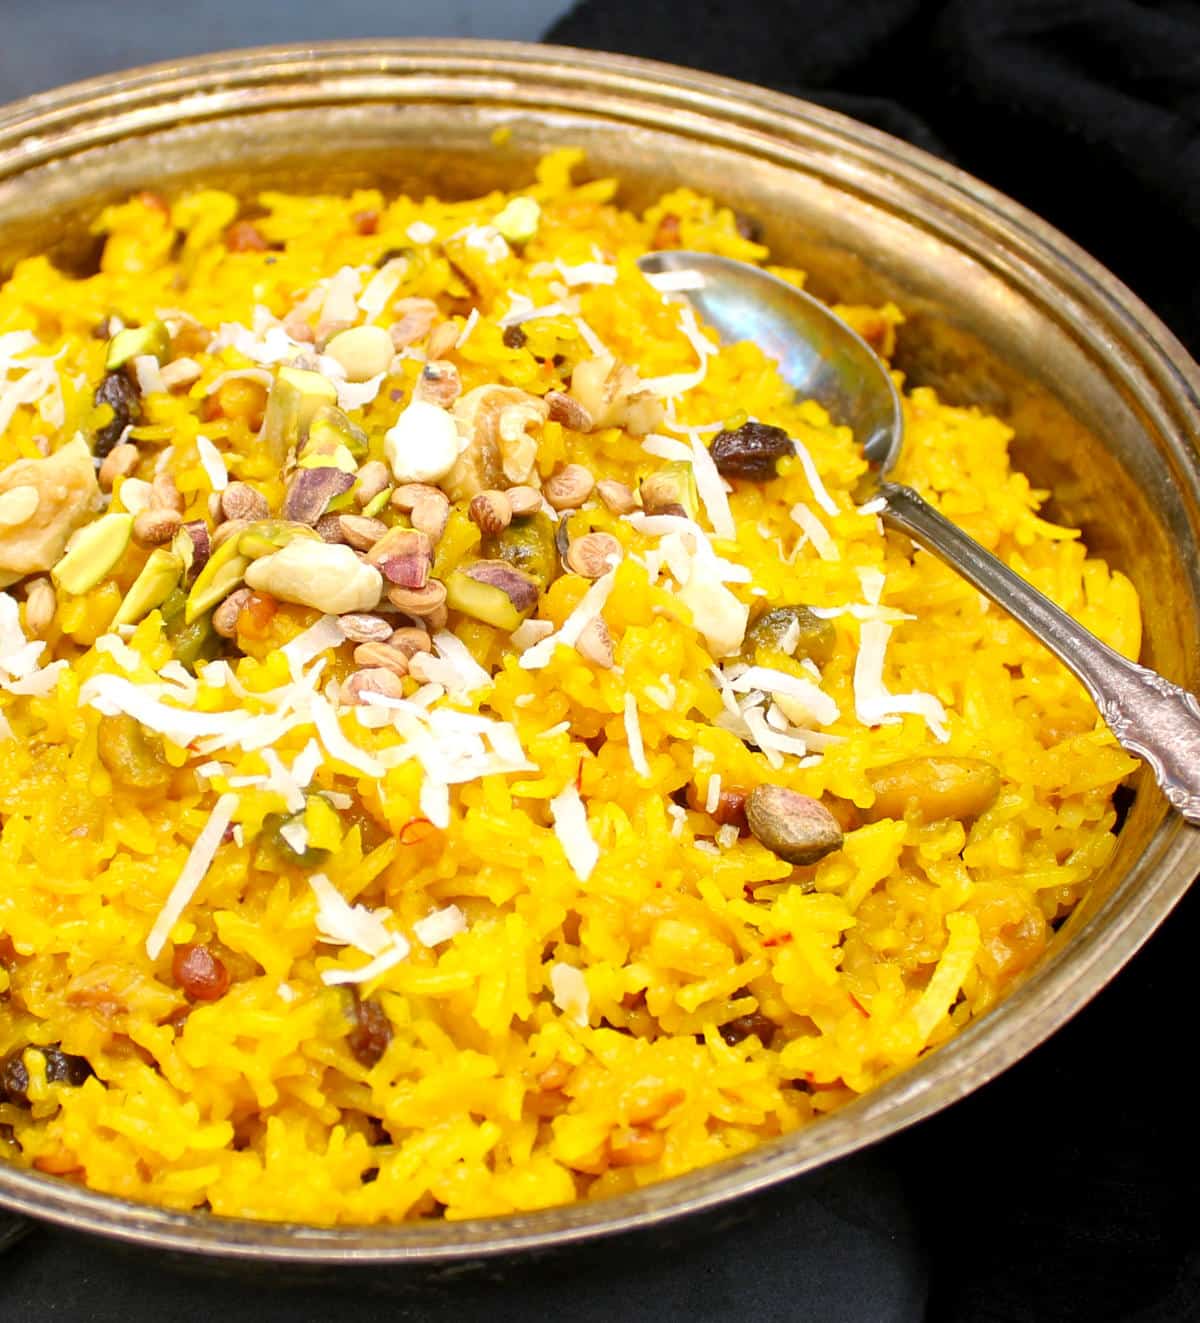 Photo of zarda pulao in a silver serving dish with nuts and dry fruits and shredded coconut.